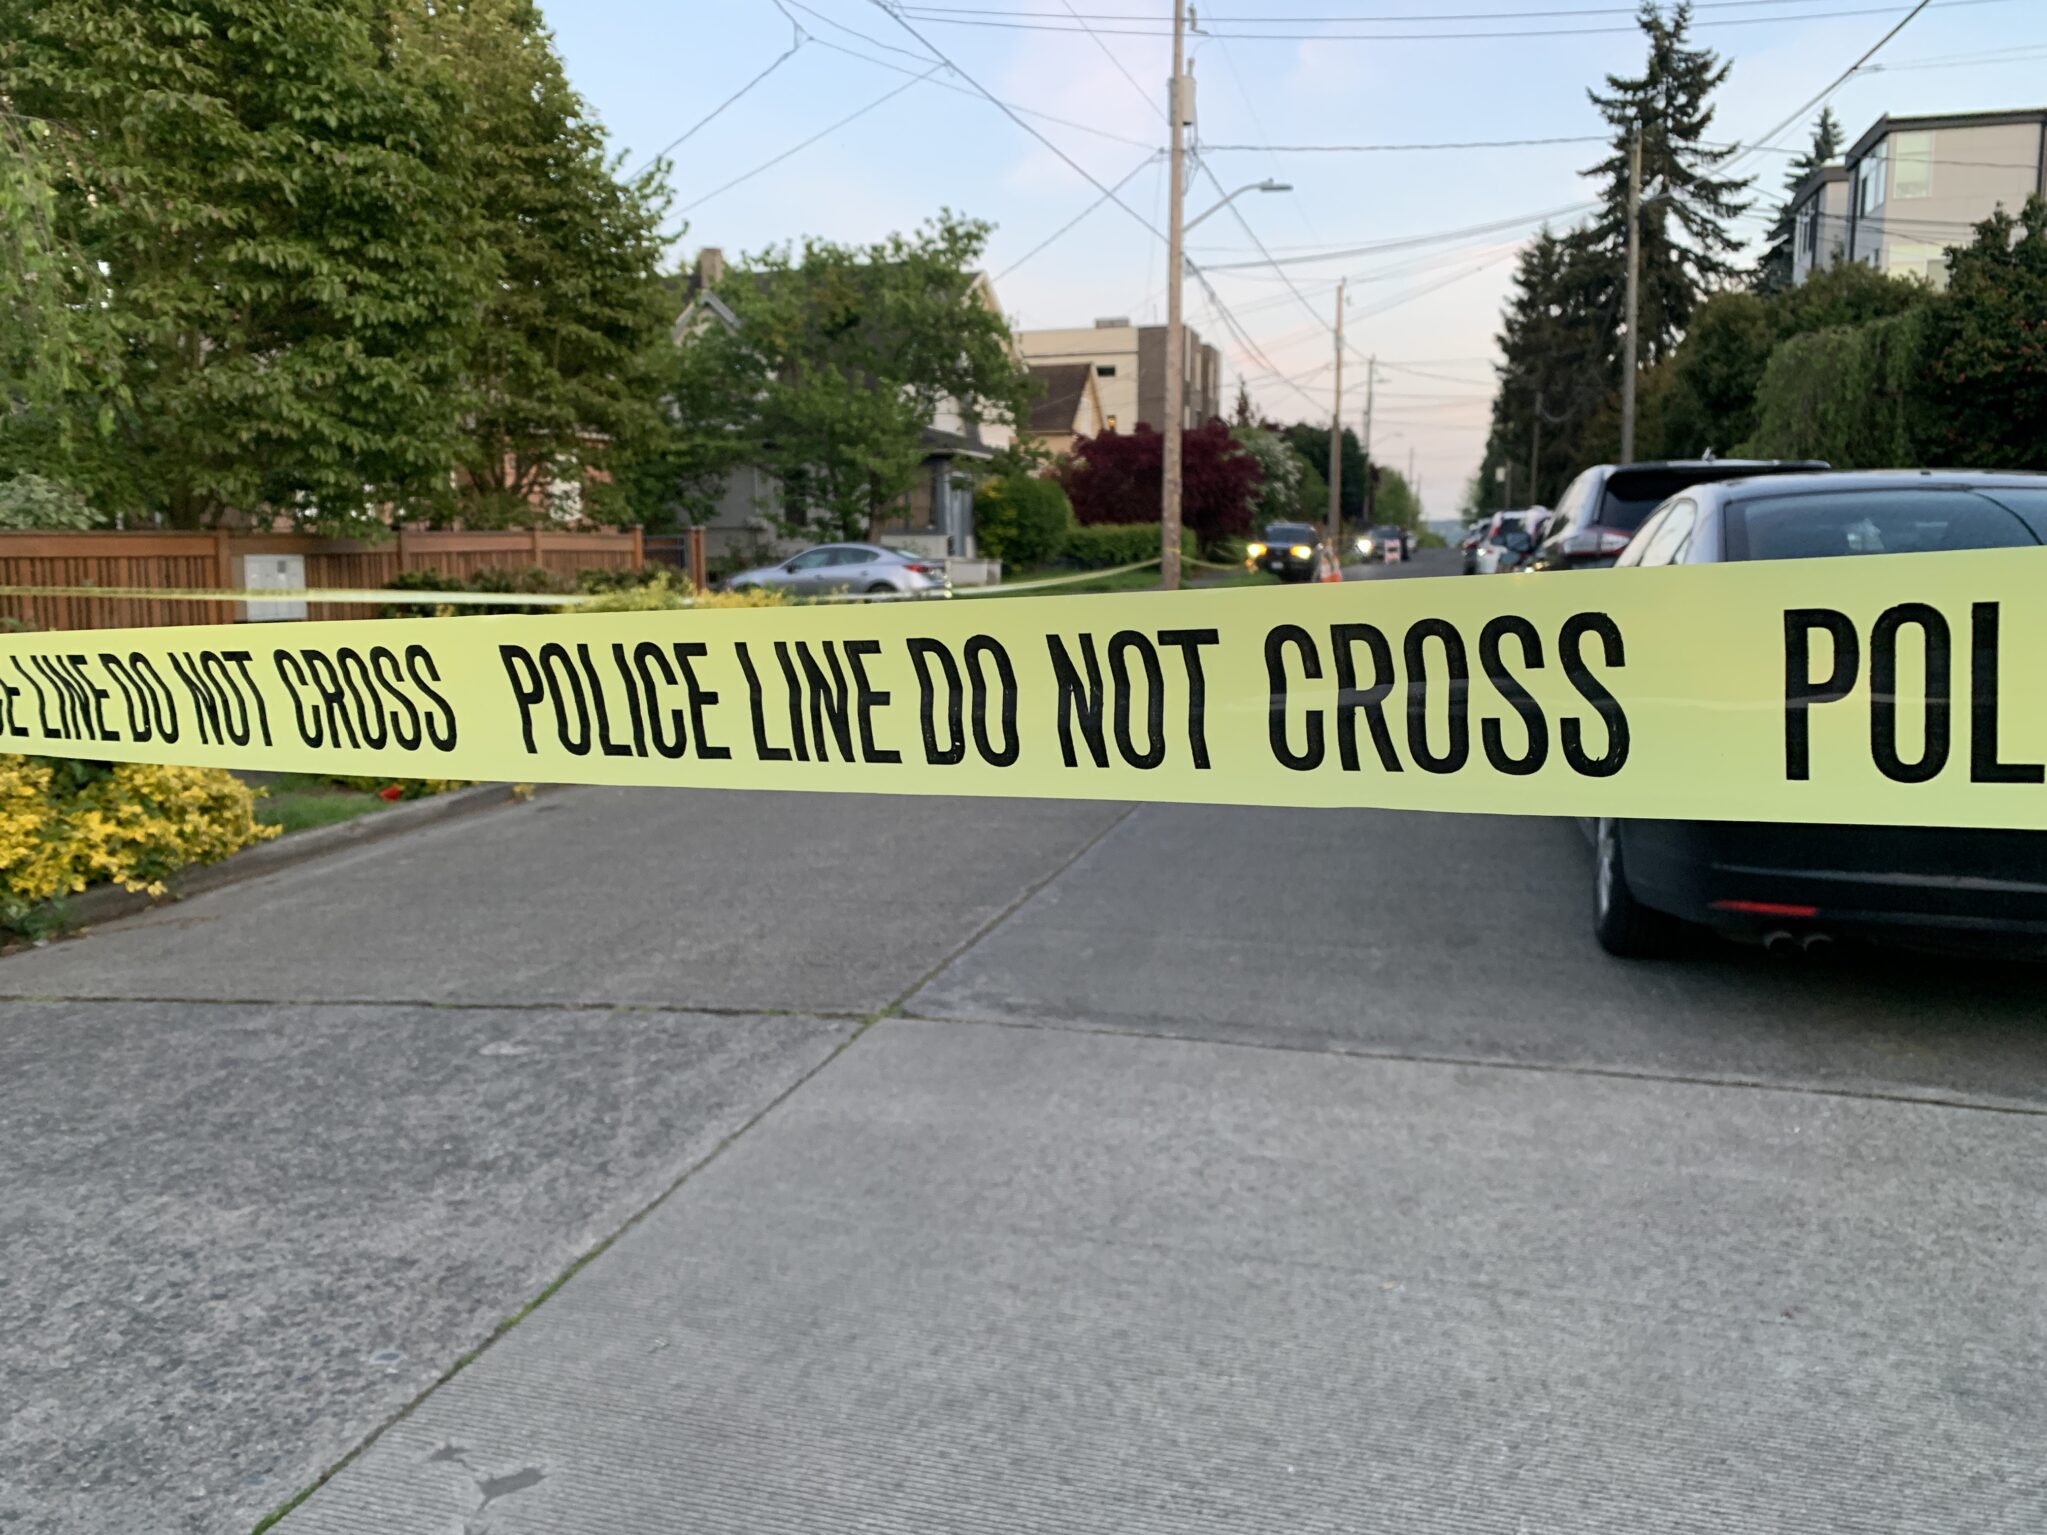 Seattle Police Investigating Death of Child in the Magnolia Neighborhood – SPD Blotter